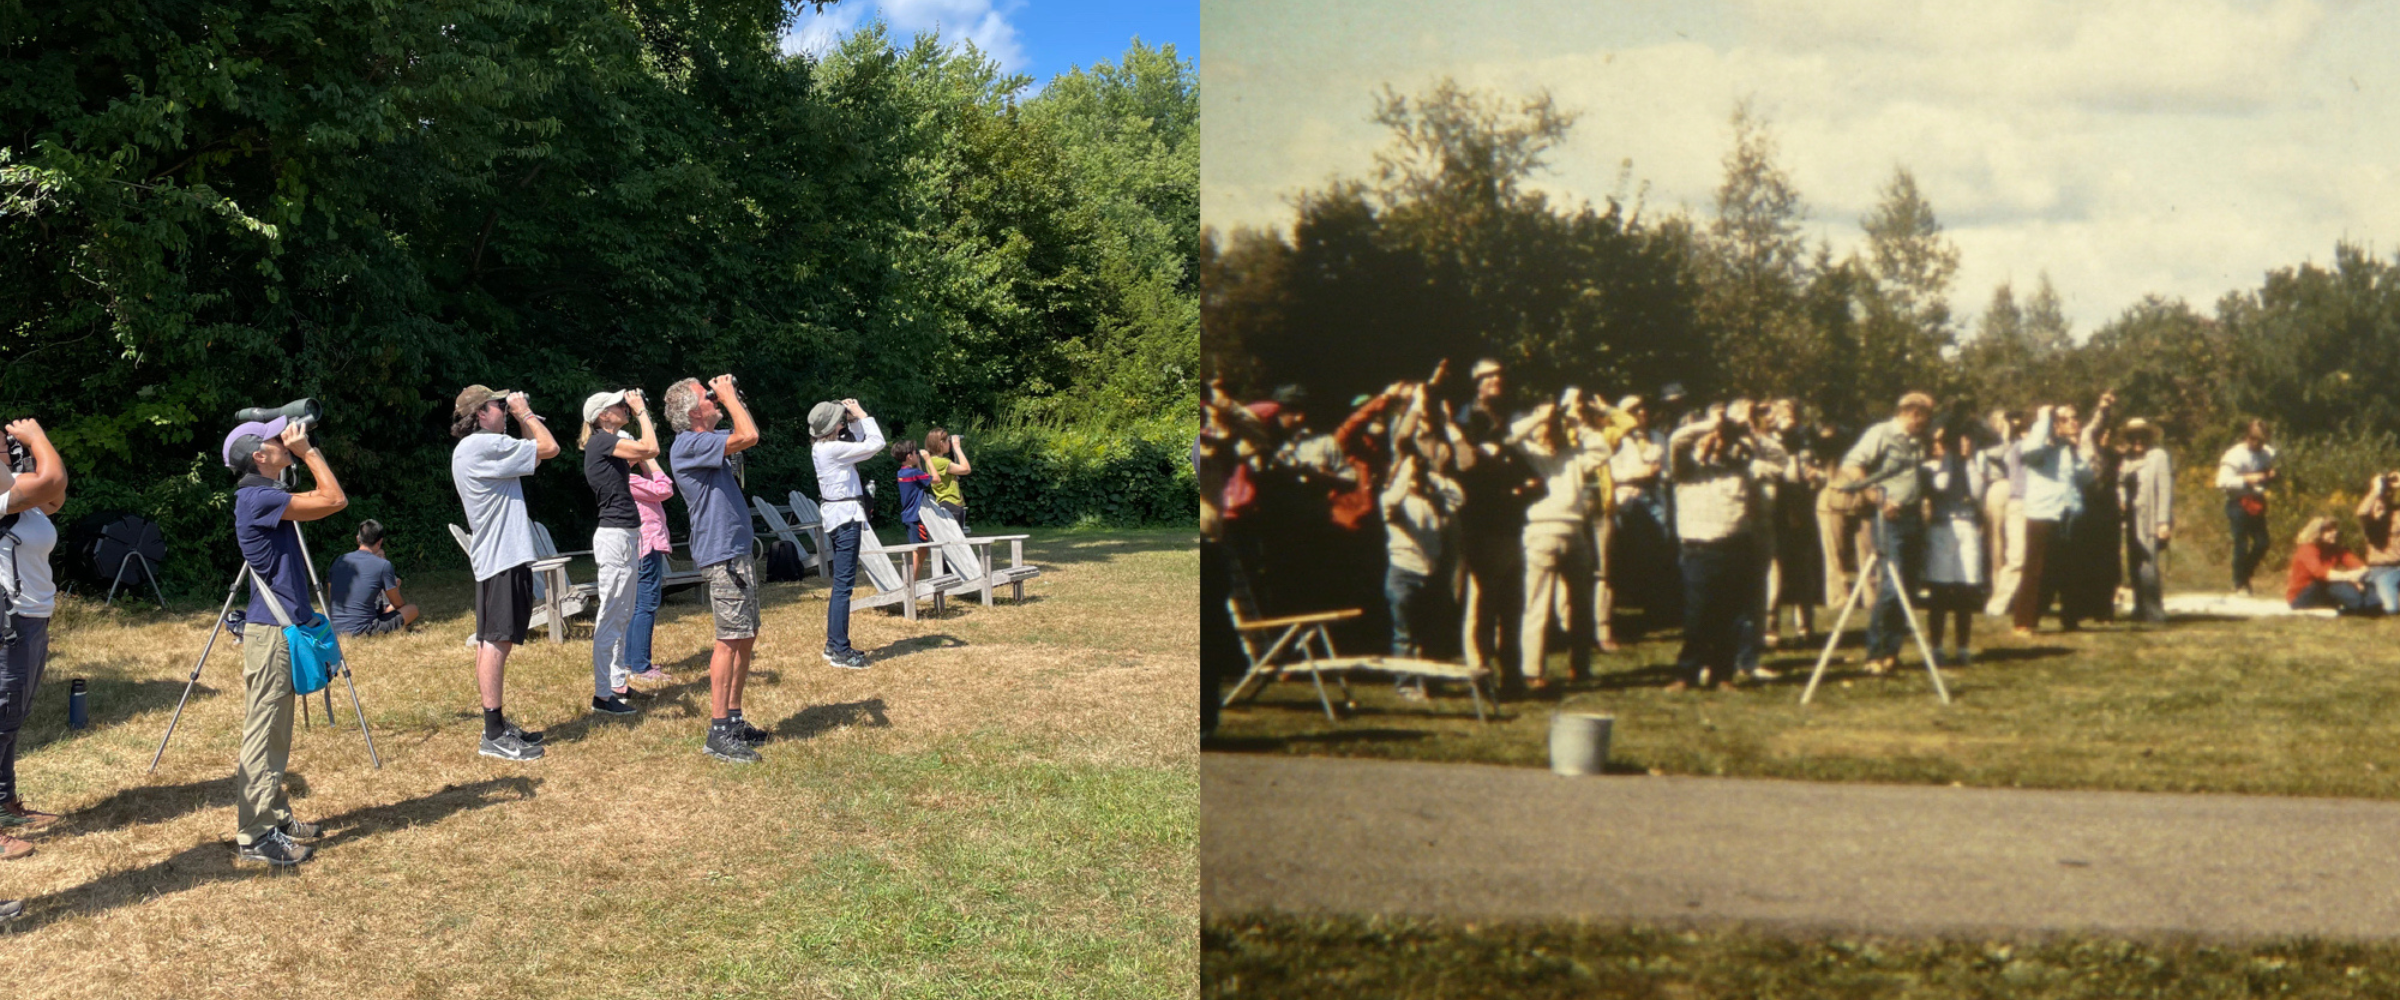 A collage of two photos, side by side, of people on a hill using binoculars to look into the sky. The right photo is recent, and the left photo is sepia-tinged and older.